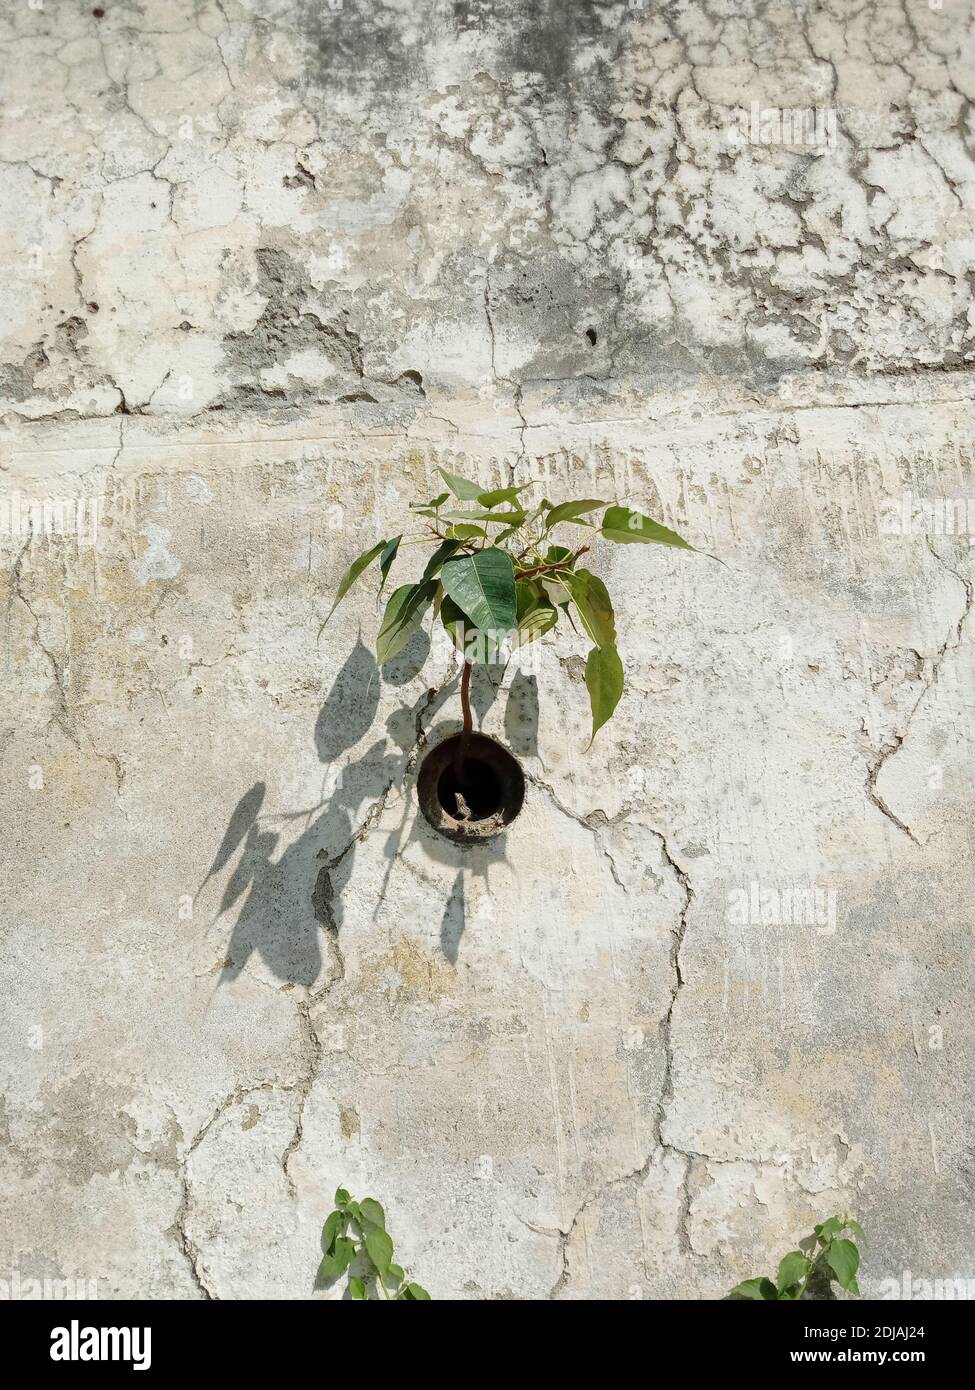 Ficus religiosa or peepal or Sacred fig plant on wall Stock Photo